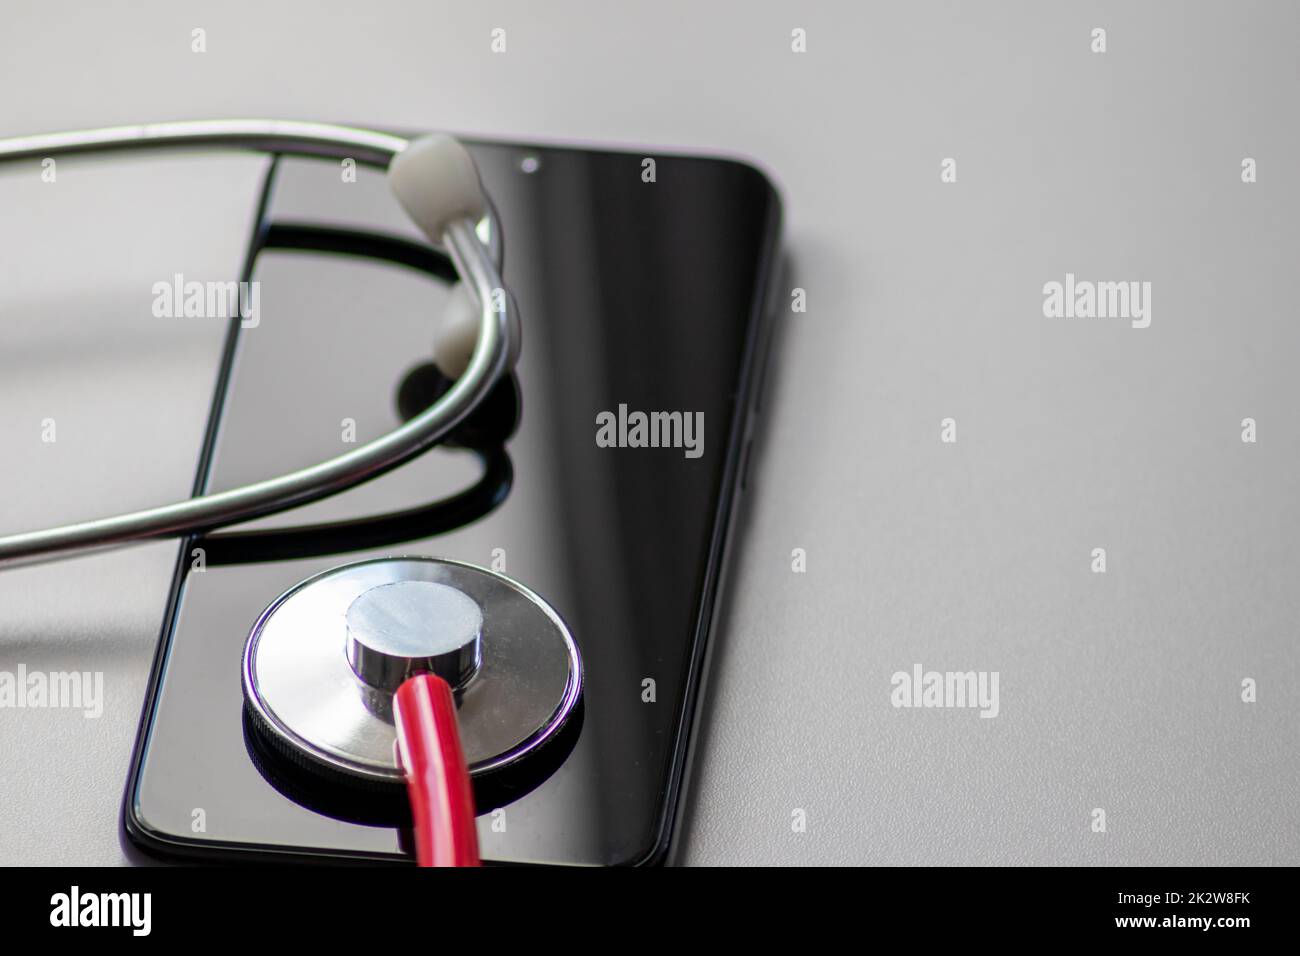 Red stethoscope on black smartphone represents health records and digital patient records with mobile devices for digital doctors and digital diagnostic treatment with modern equipment and technology Stock Photo